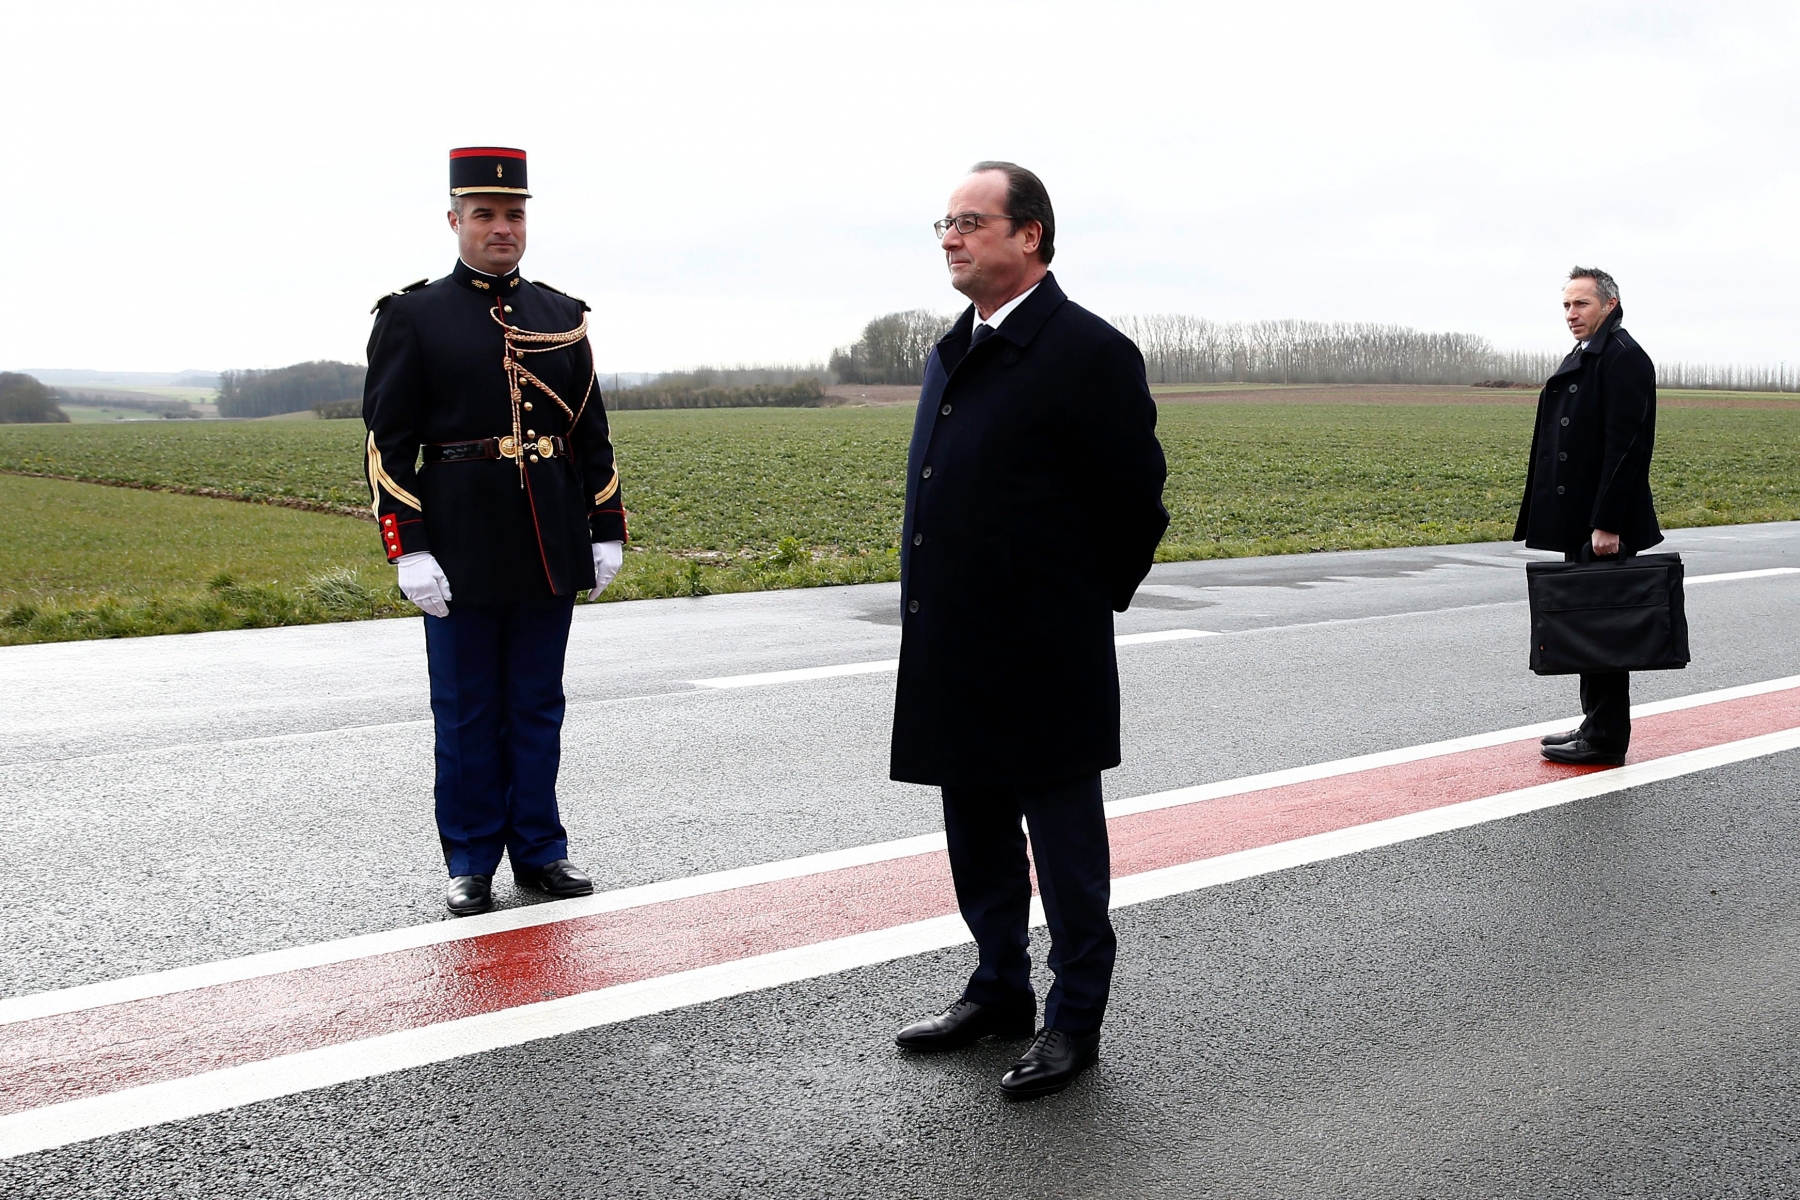 epa05192339 French President Francois Hollande (R) waits for the British Prime Minister David Cameron (not pictured) to arrive outside the Pozieres British Memorial as part of the 34th Franco-British summit, in Pozieres, near Amiens, France, 03 March 2016. The centenary of the Battle of the Somme will be commemorated in 2016. The migrant crisis in Calais will be discussed at the 34th Franco-British summit.  EPA/YOAN VALAT / POOL MAXPPP OUT FRANCE BRITAIN DIPLOMACY